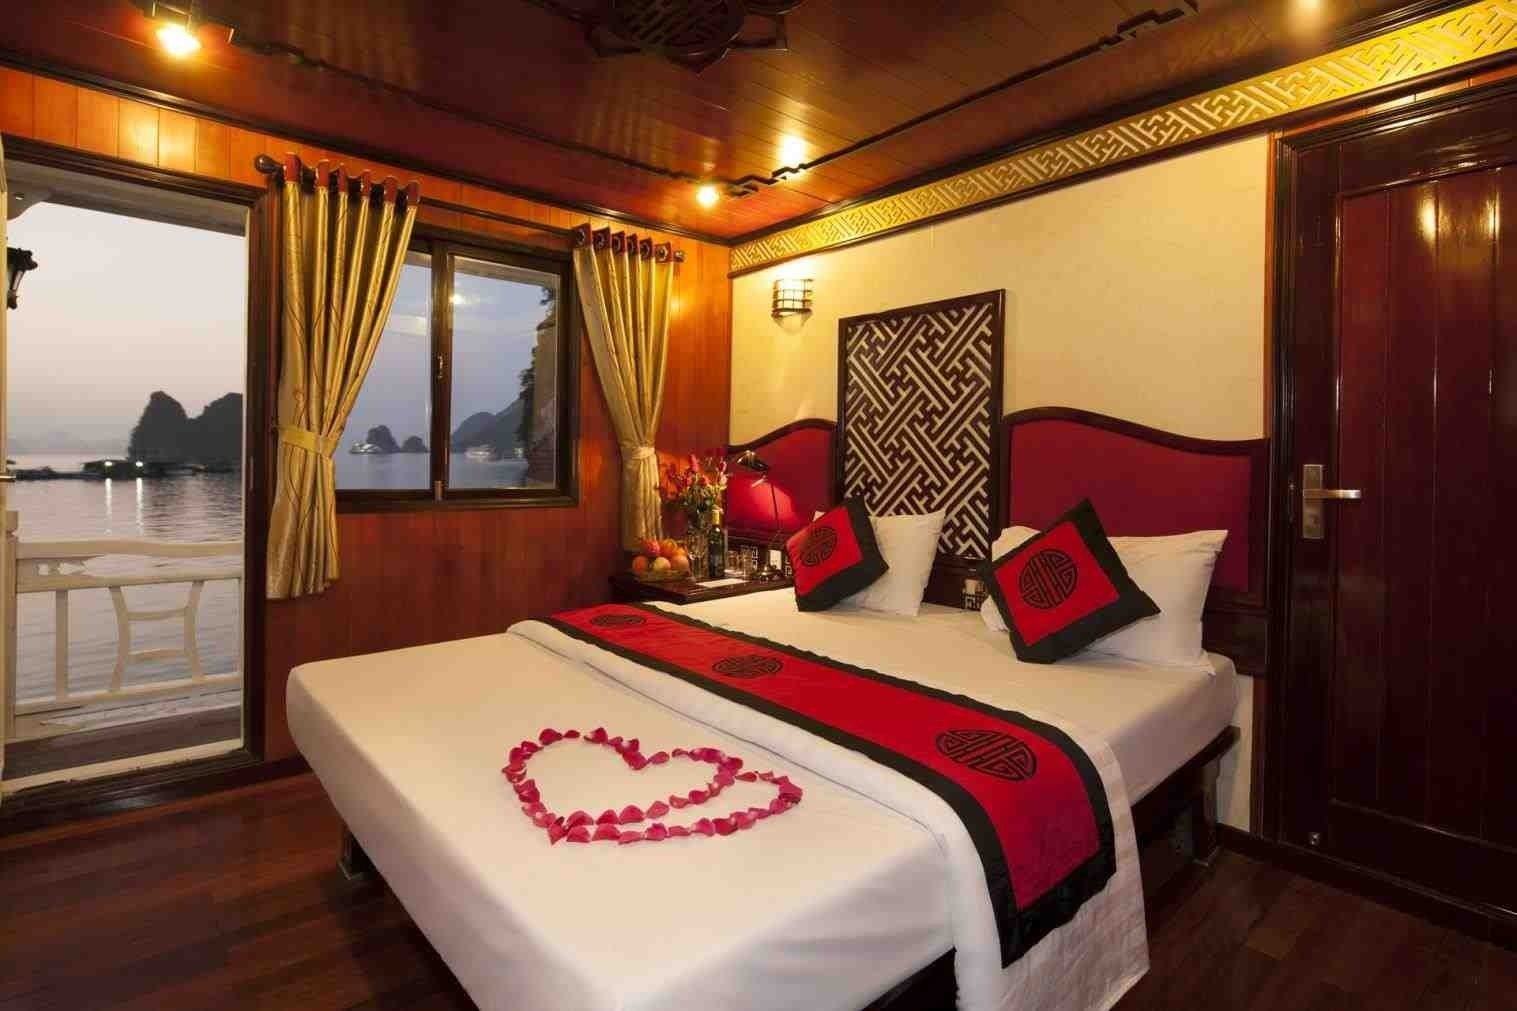 10 Nice Sexual Ideas For The Bedroom ideas to decorate bedroom romantic catamart club 2022